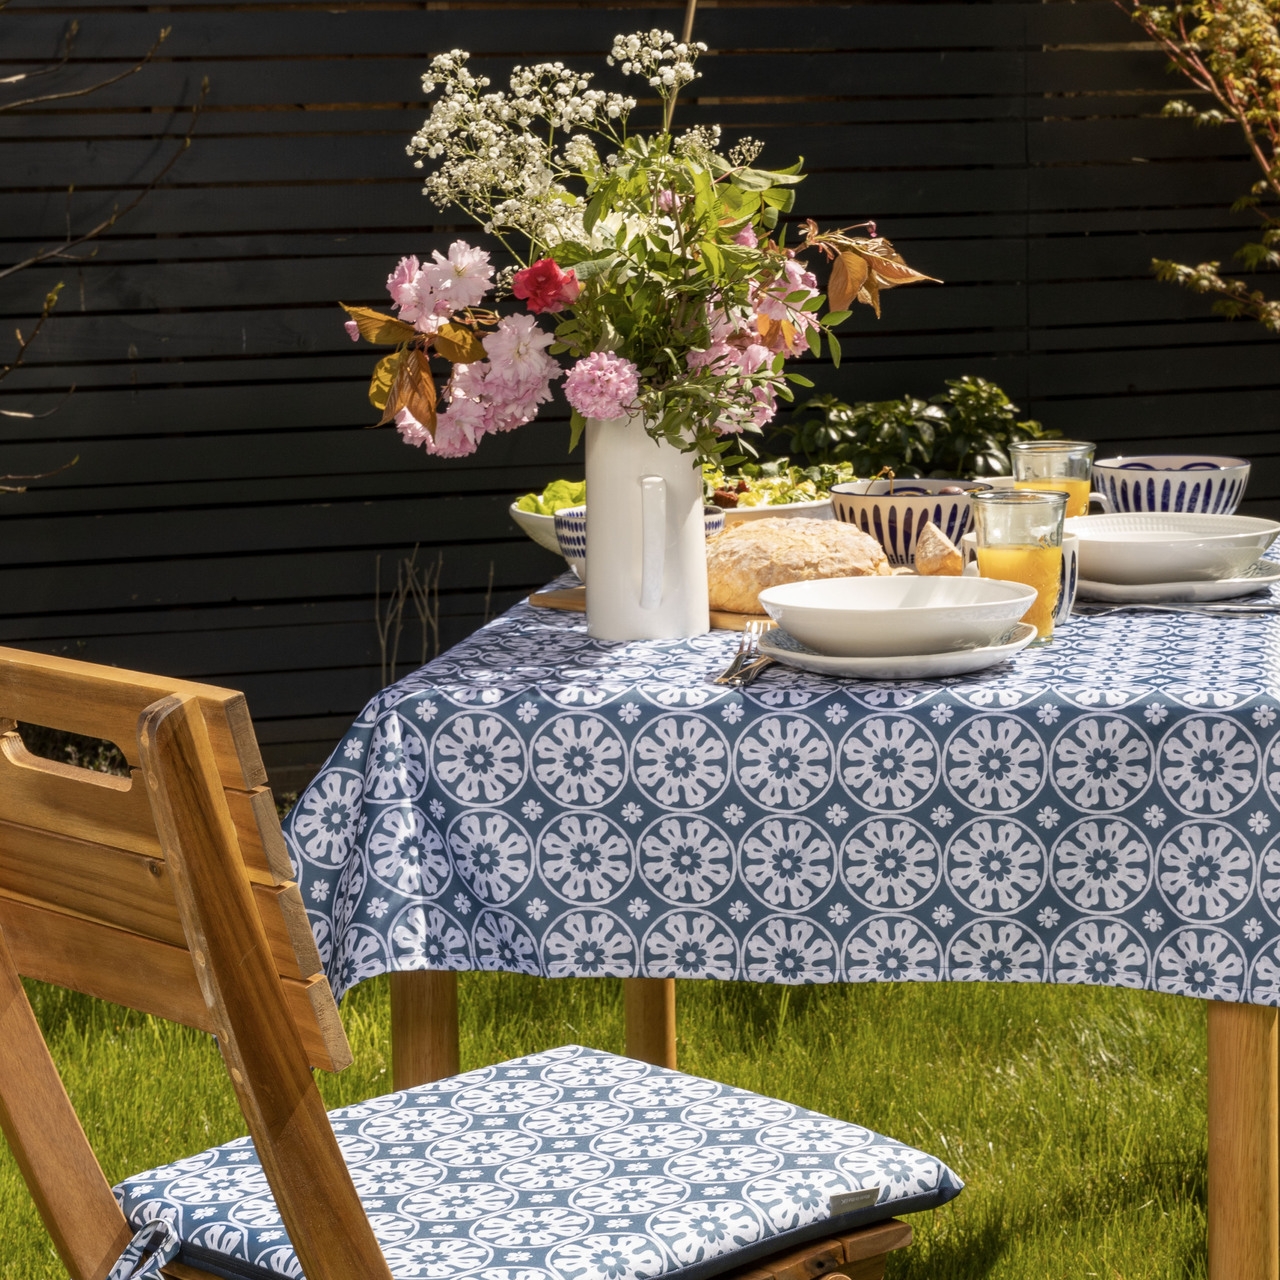 Celina Digby Luxury Outdoor Garden Tablecloth AVAILABLE IN 5 SIZES – Optional Centre Hole for Parasol Casablanca Navy MEDIUM (180cm x 140cm)